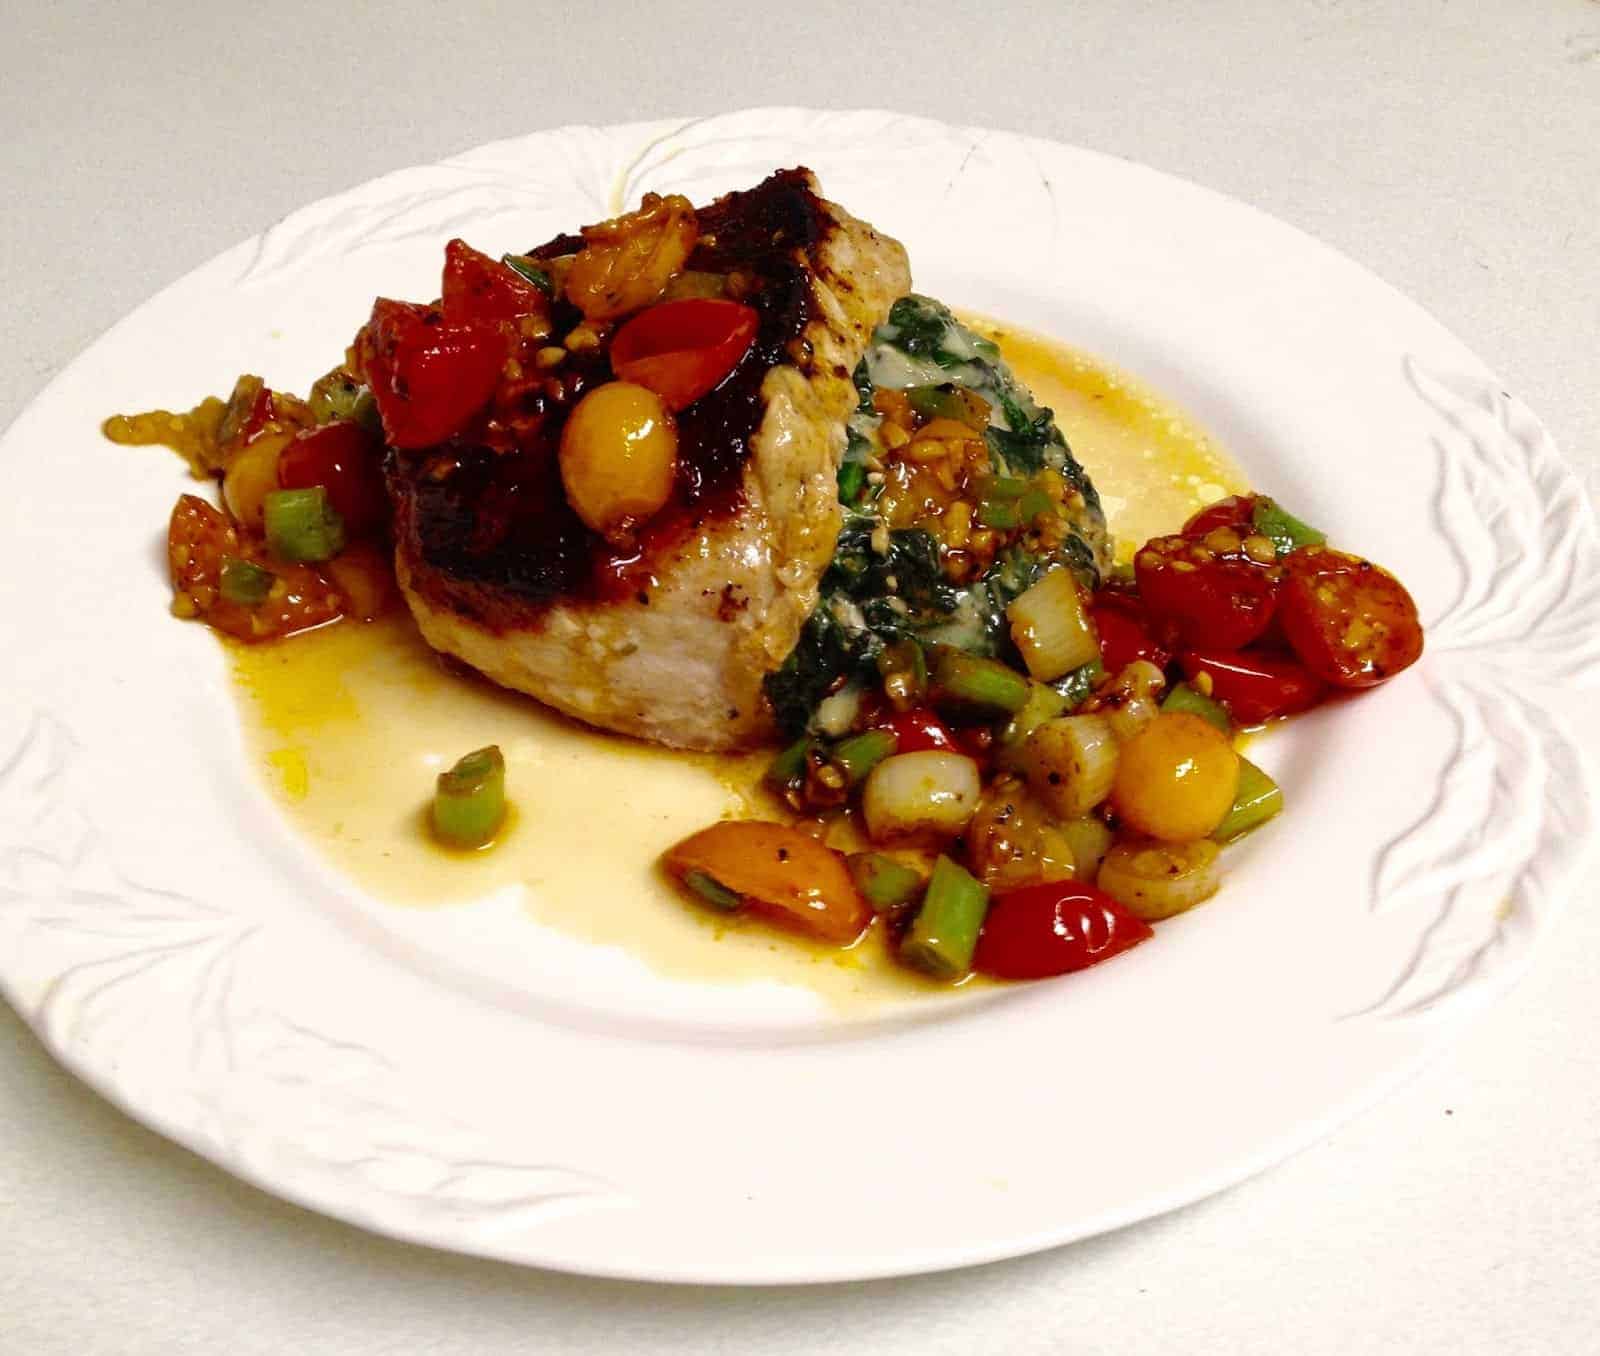 Jacques Pépin’s Superb recipe for Spinach and Gruyère Stuffed Pork Chops